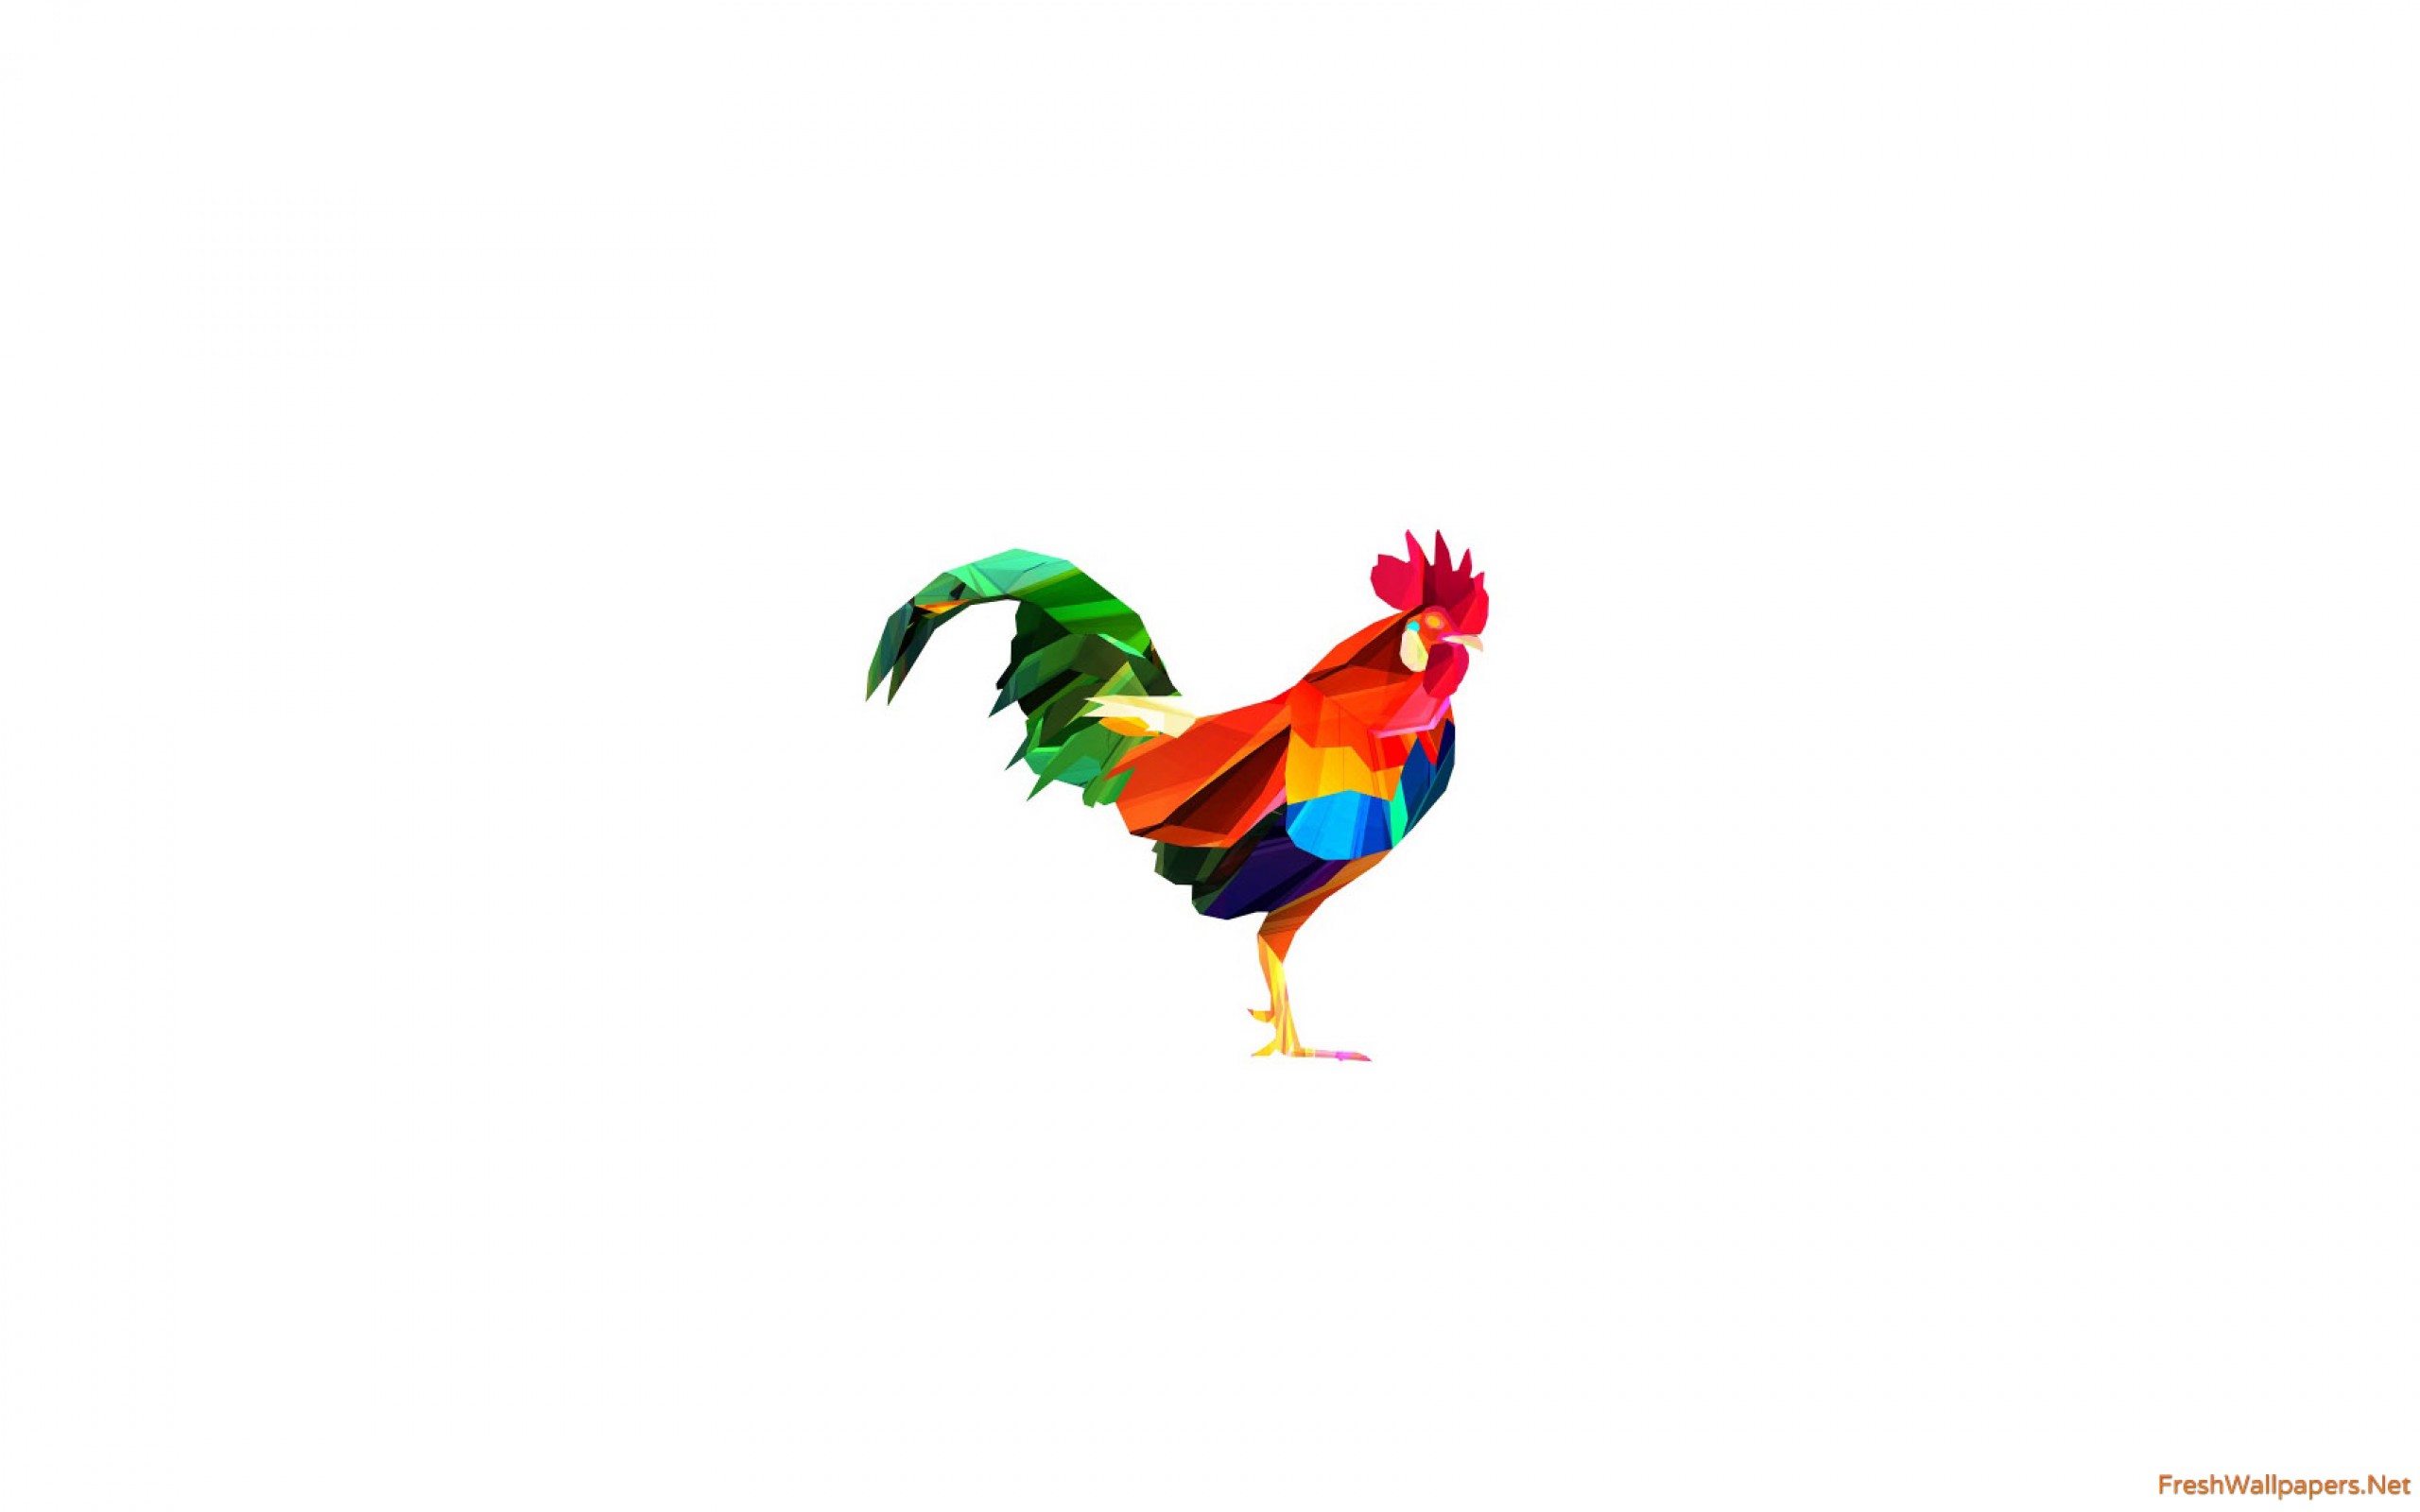 Colorful Rooster Vector wallpapers | Freshwallpapers